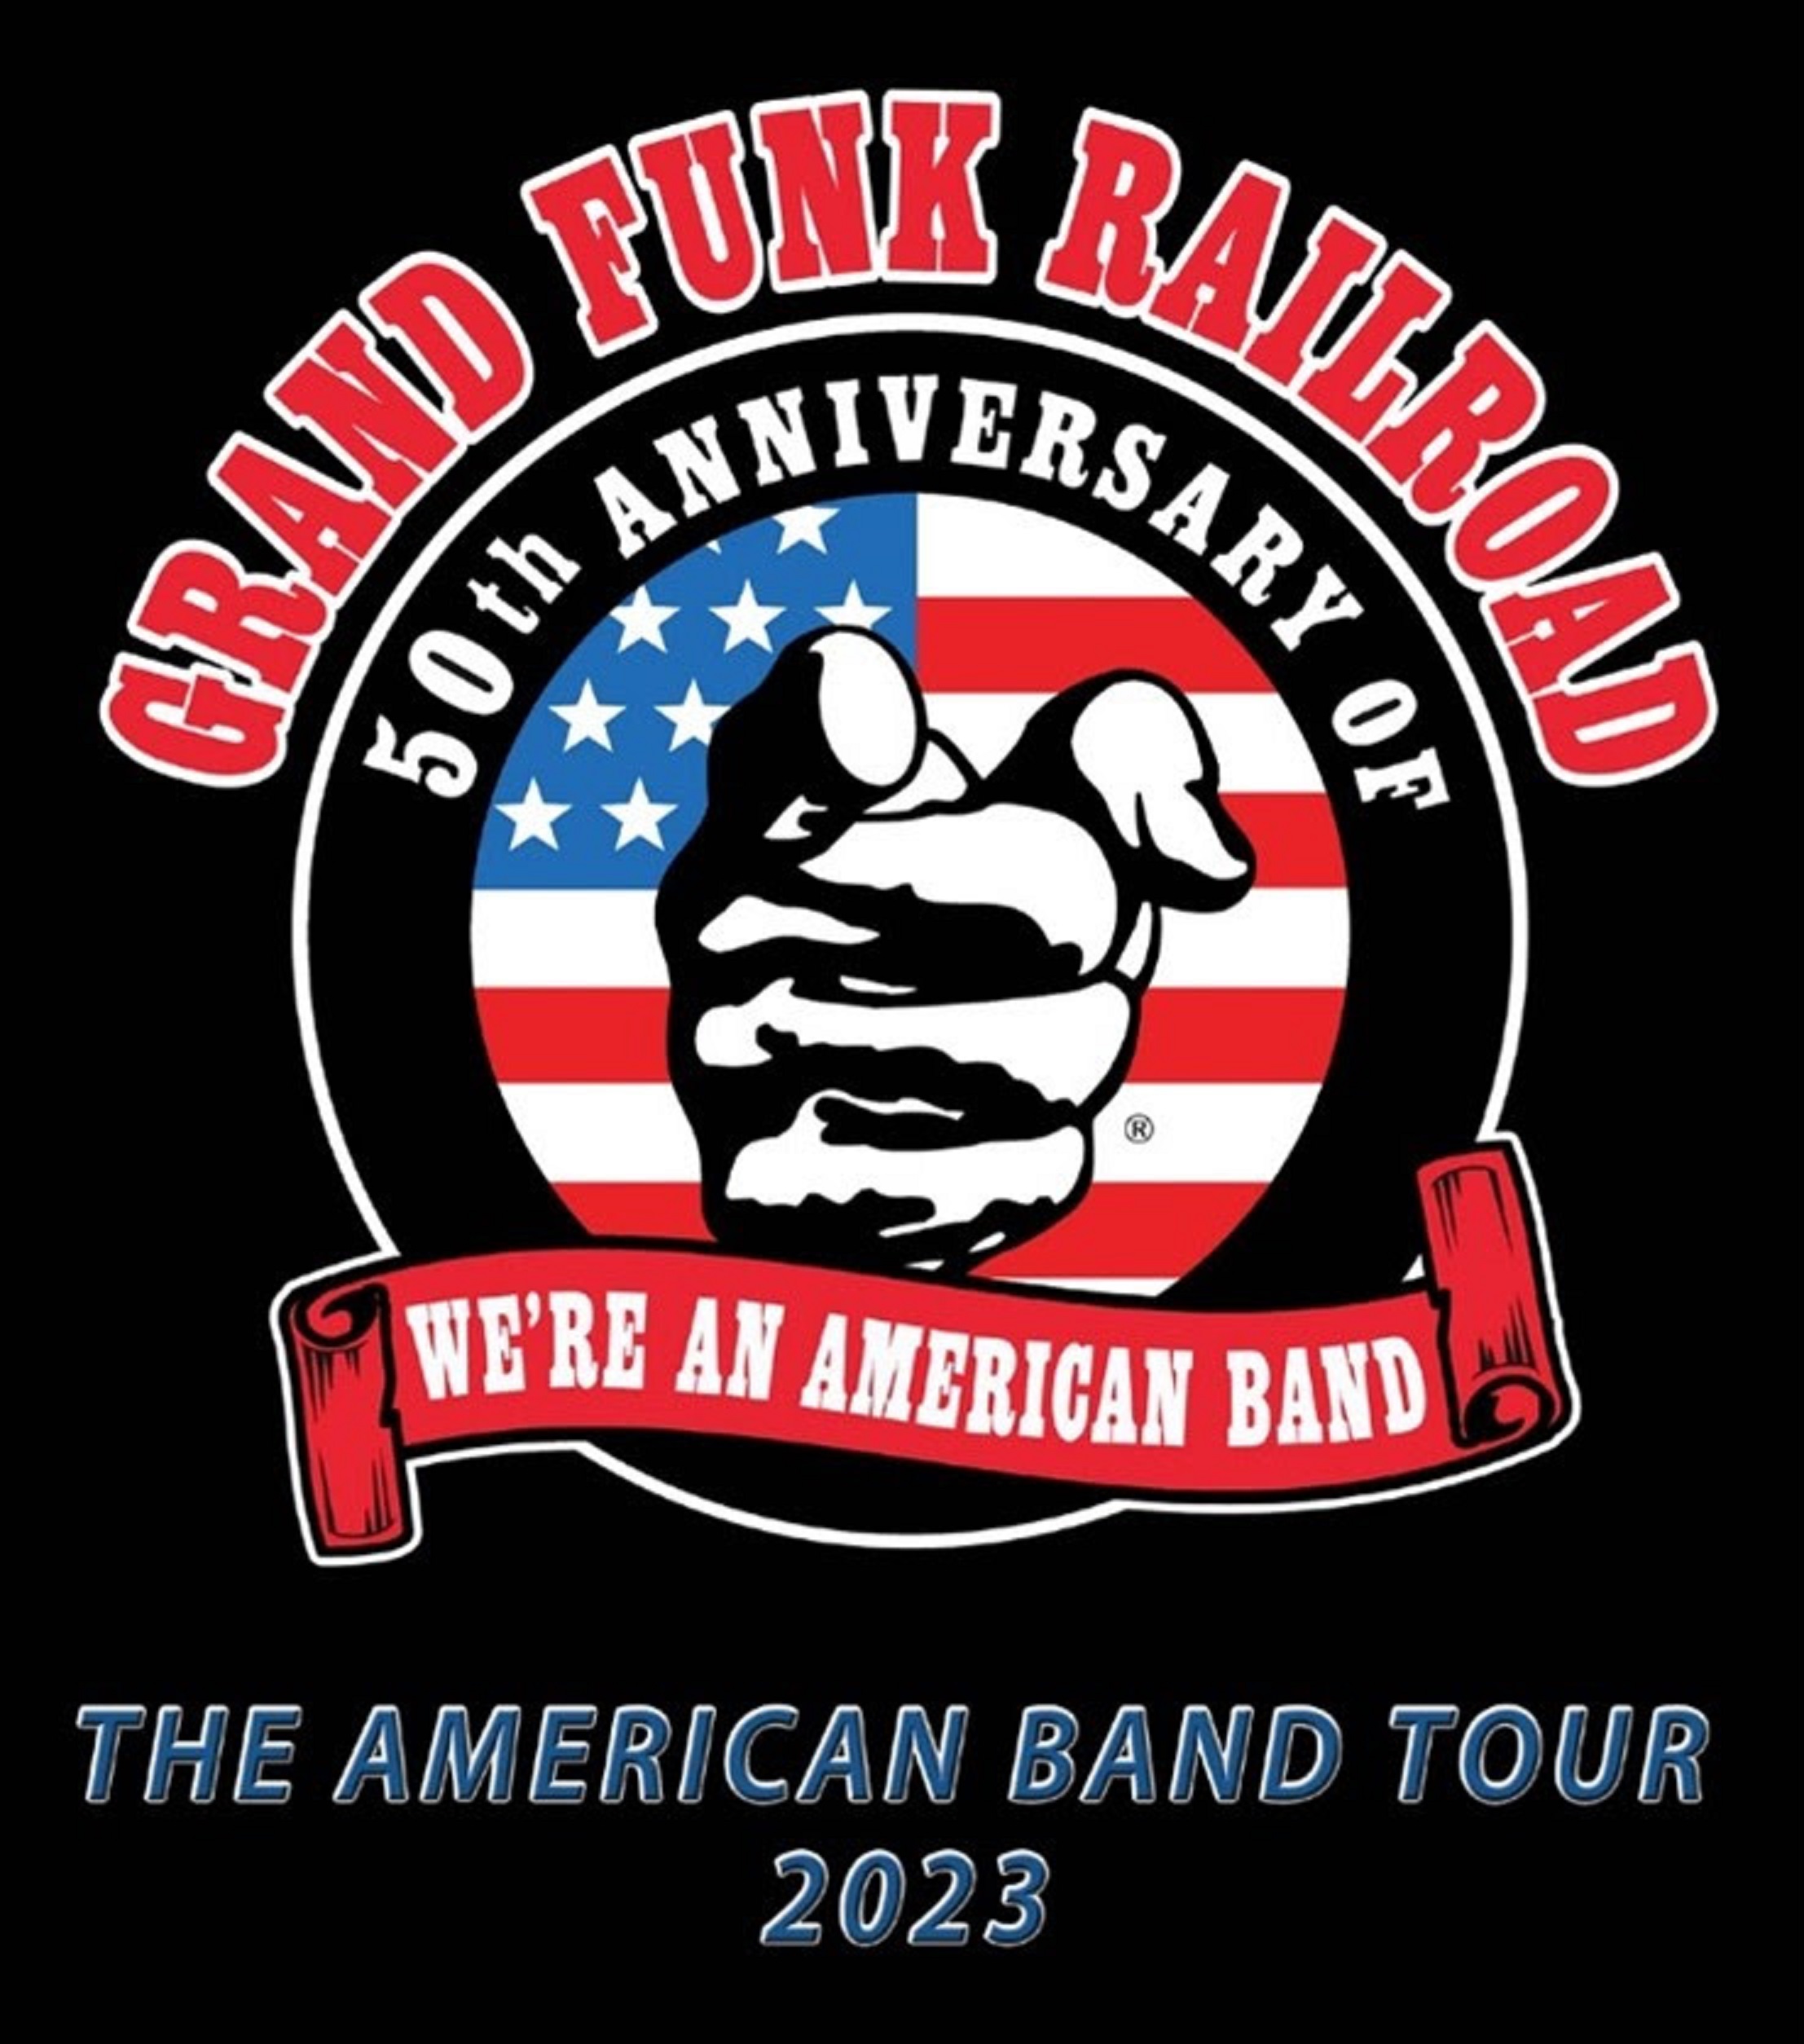 GRAND FUNK RAILROAD Celebrates The 50th Anniversary Of Their 1973 “We’re An American Band” Platinum Single And Album With ‘The American Band Tour’